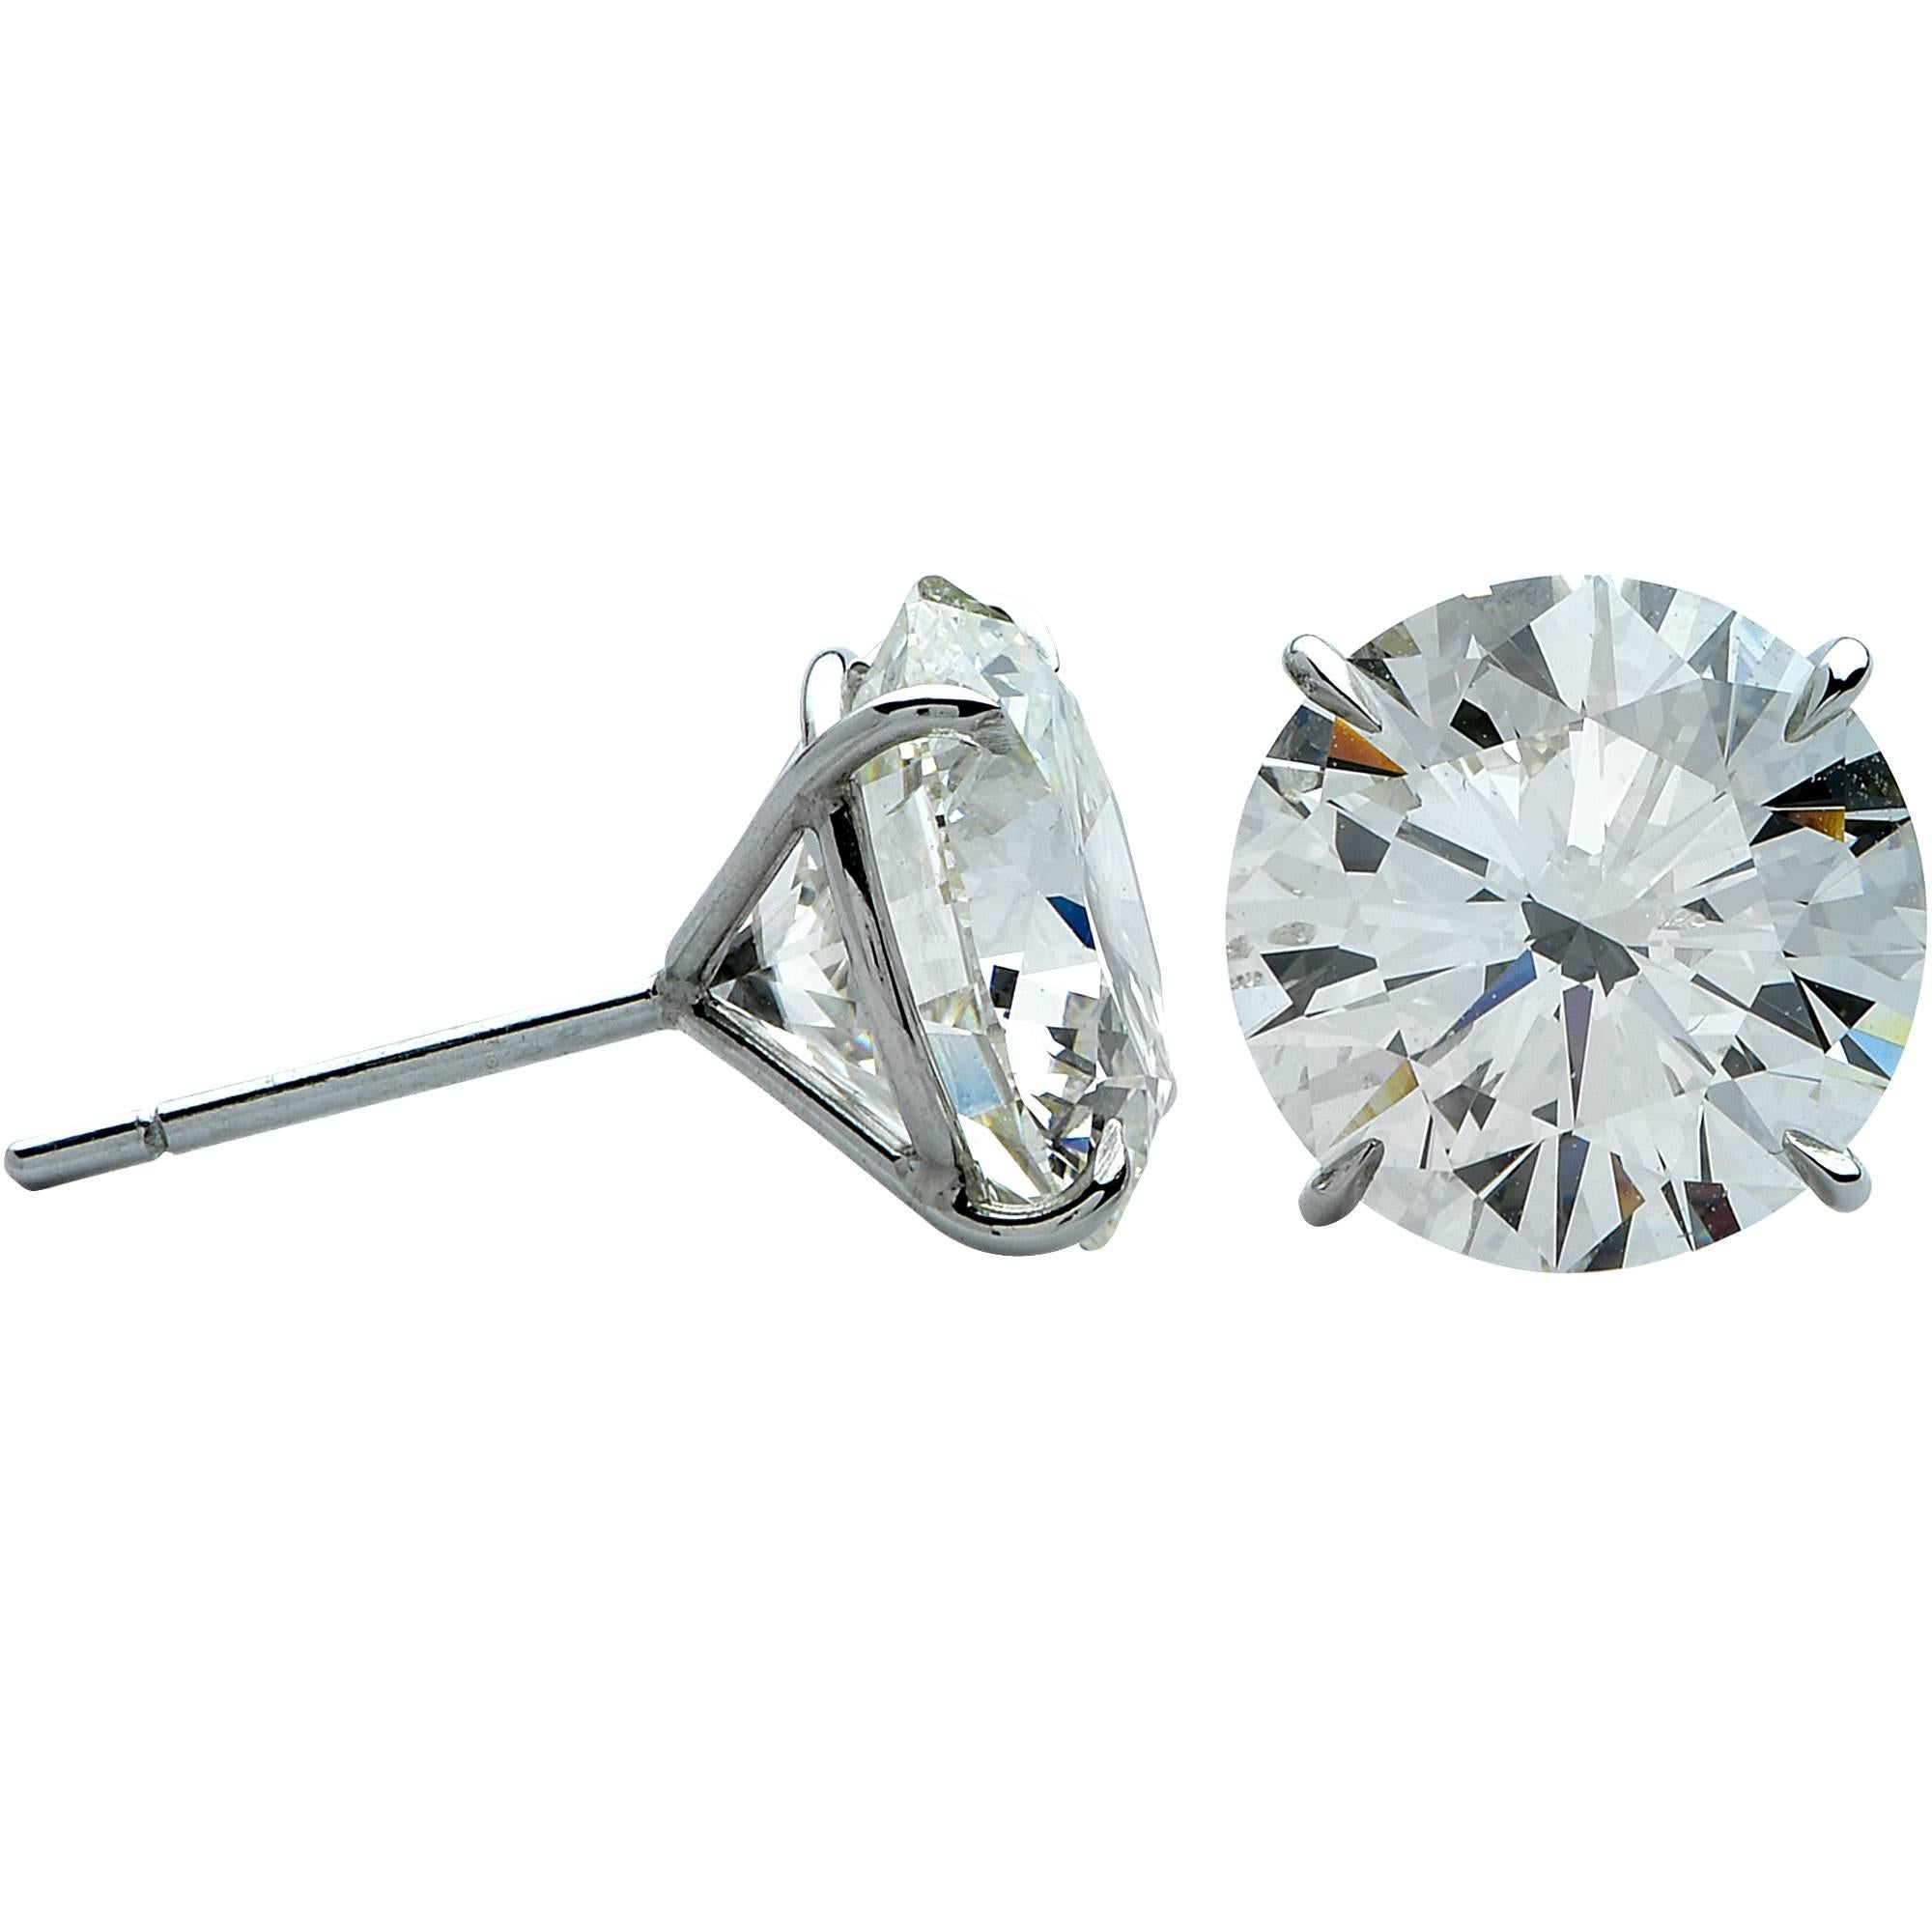 Vivid Diamonds & Jewelry created this handmade platinum solitaire stud earring set which feature 2 GIA graded round brilliant cut diamonds weighing 9.81cts total, K color, SI1-SI2 clarity. These stunning solitaire earrings are sure to be a show